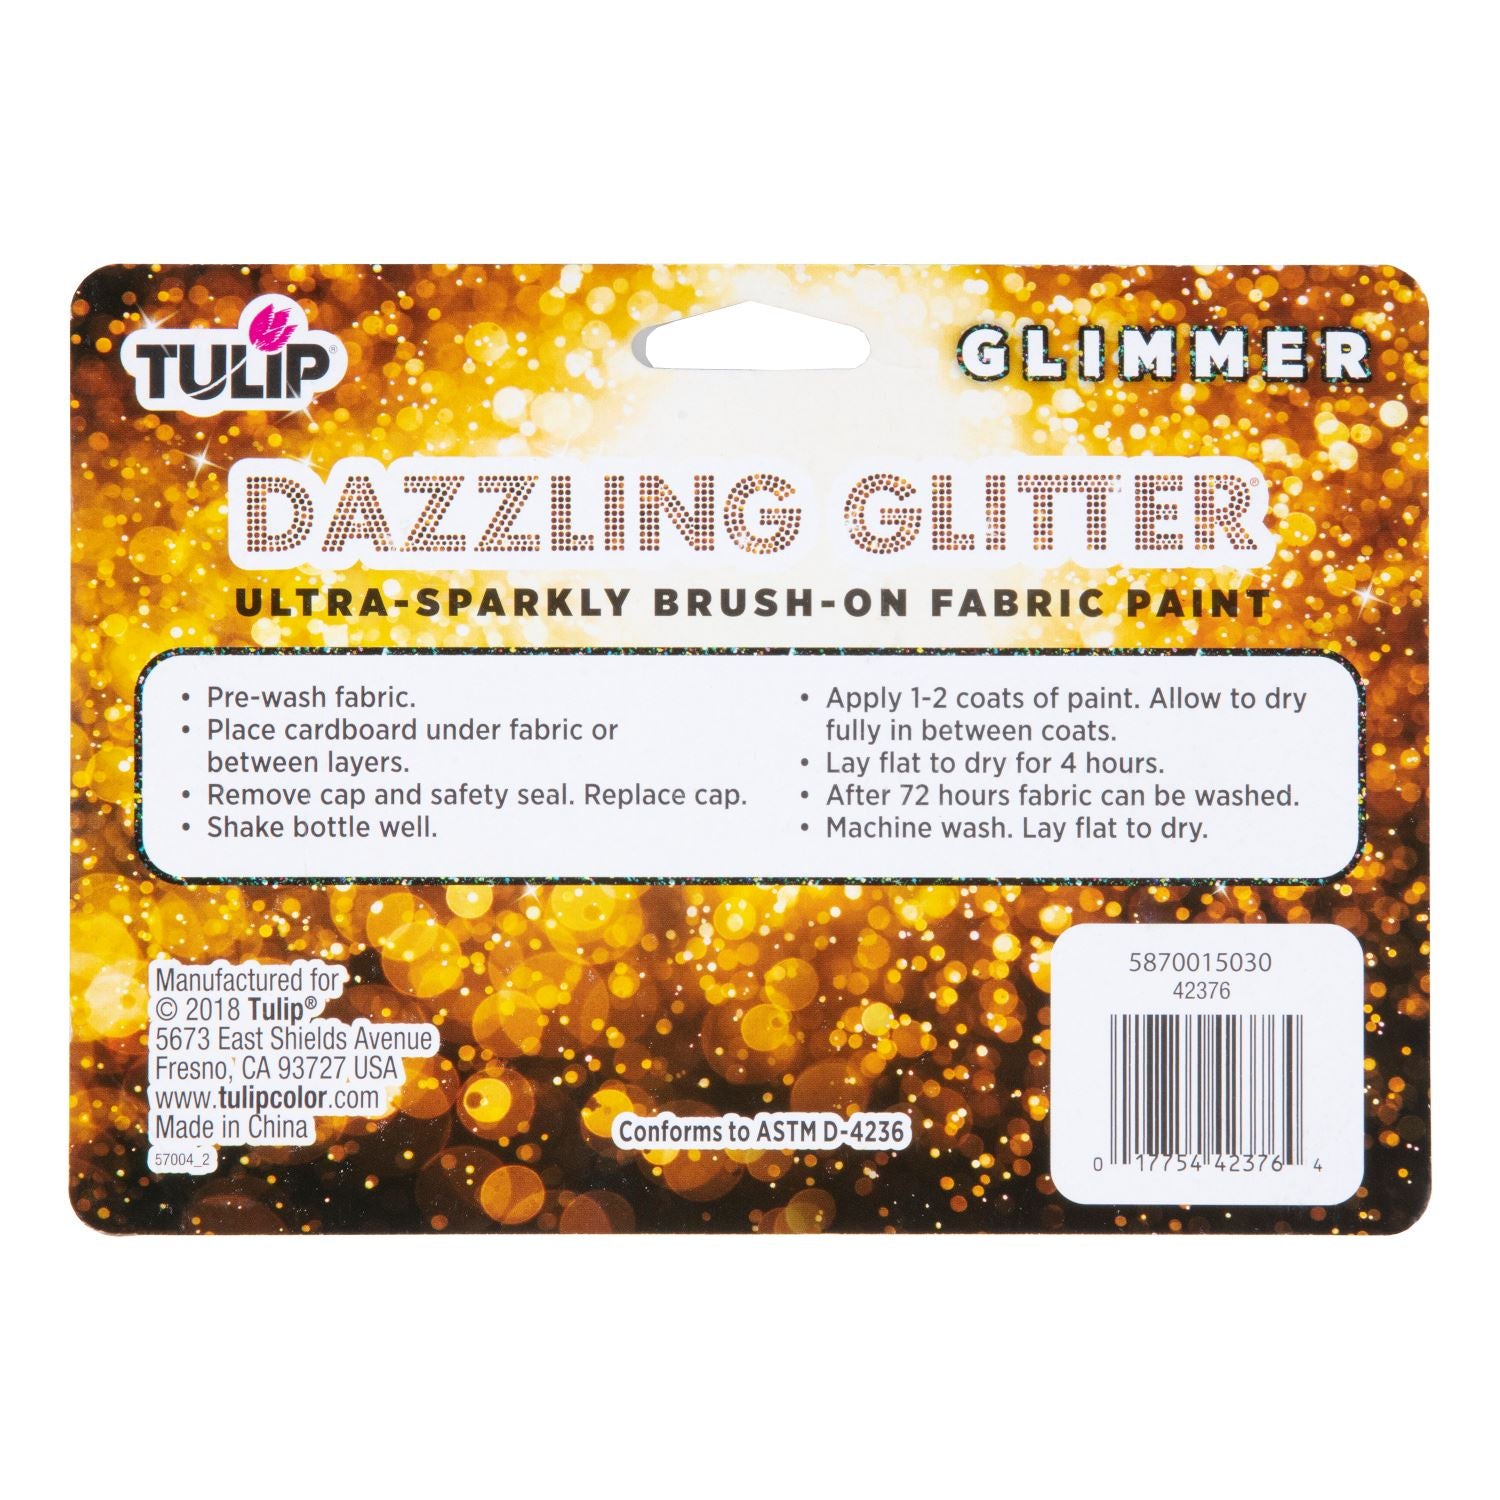 Picture of 42376 Tulip Dazzling Glitter Ultra-Sparkly Brush-On Fabric Paint Glimmer 5 Pack